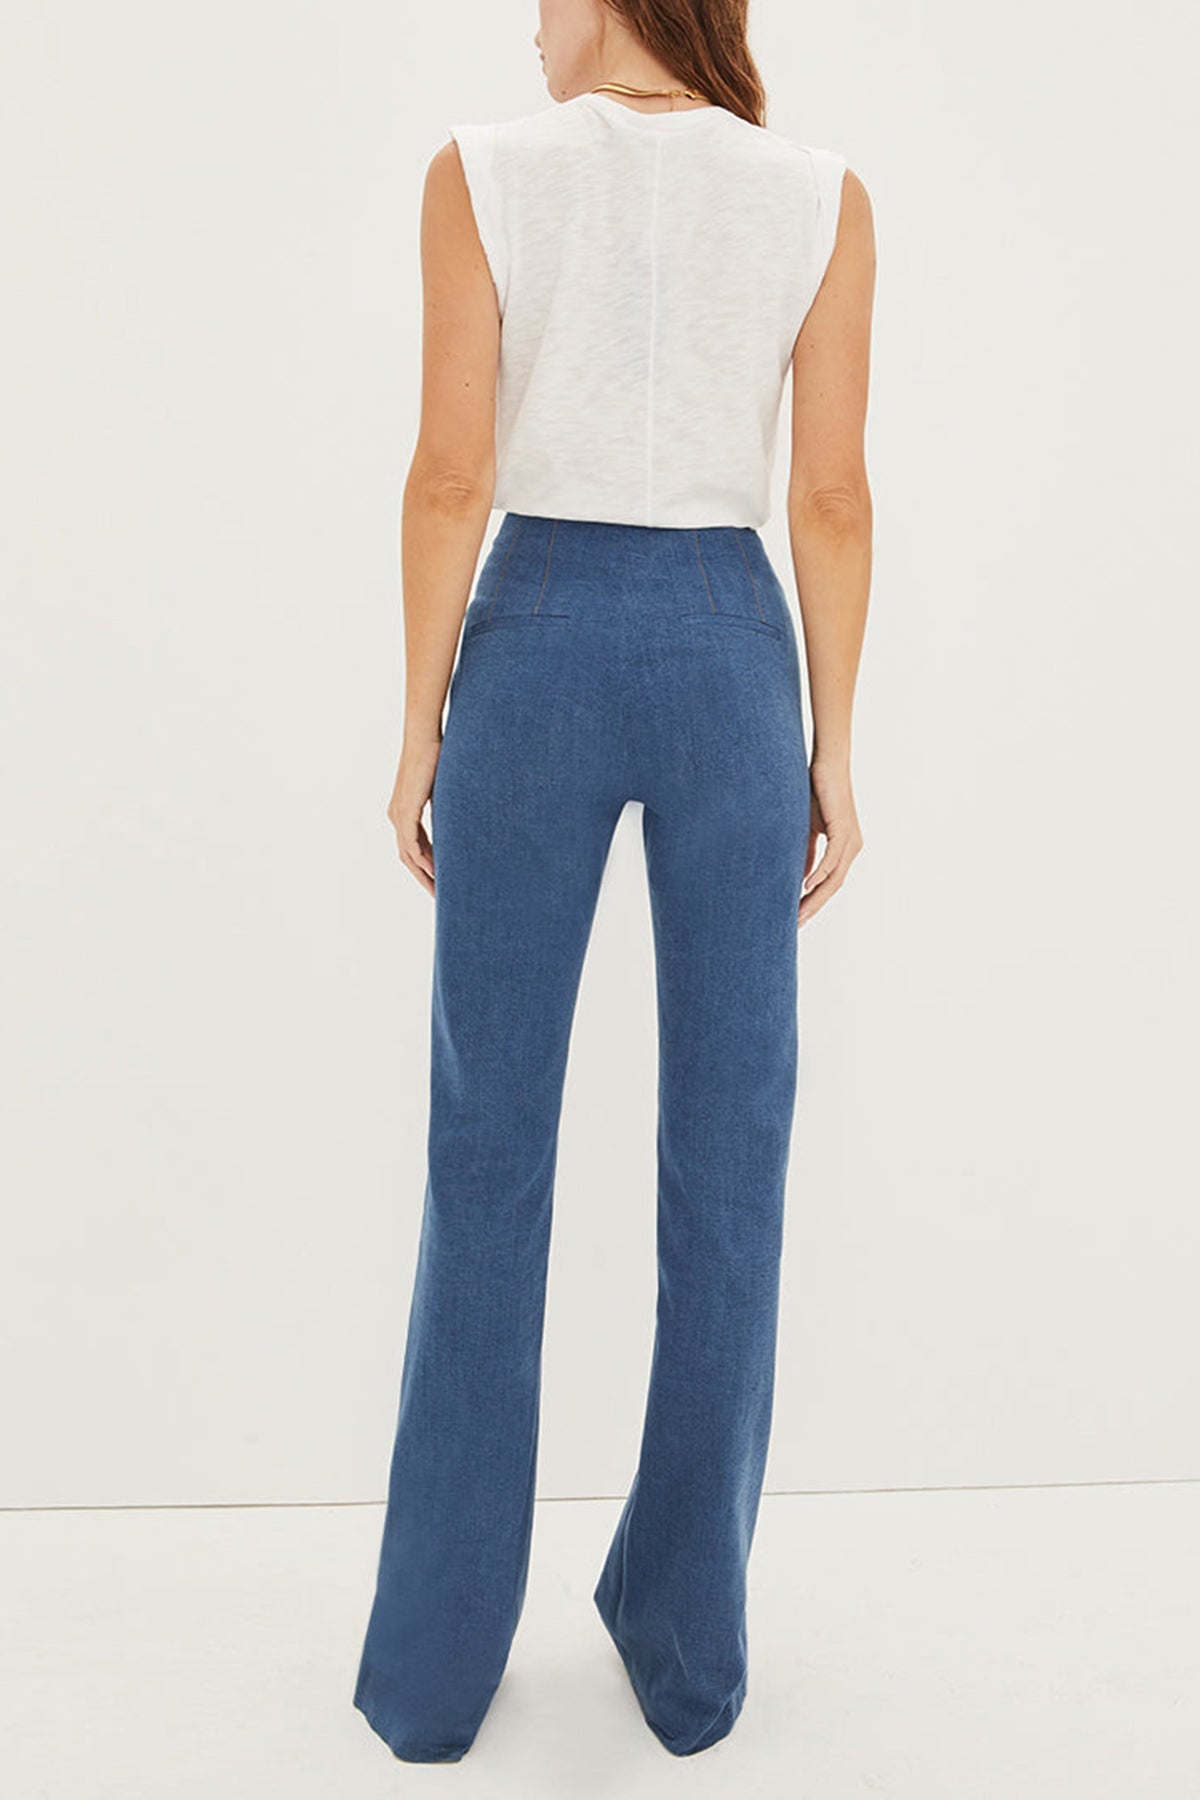 Royce Pant in Cosmo - shop-olivia.com